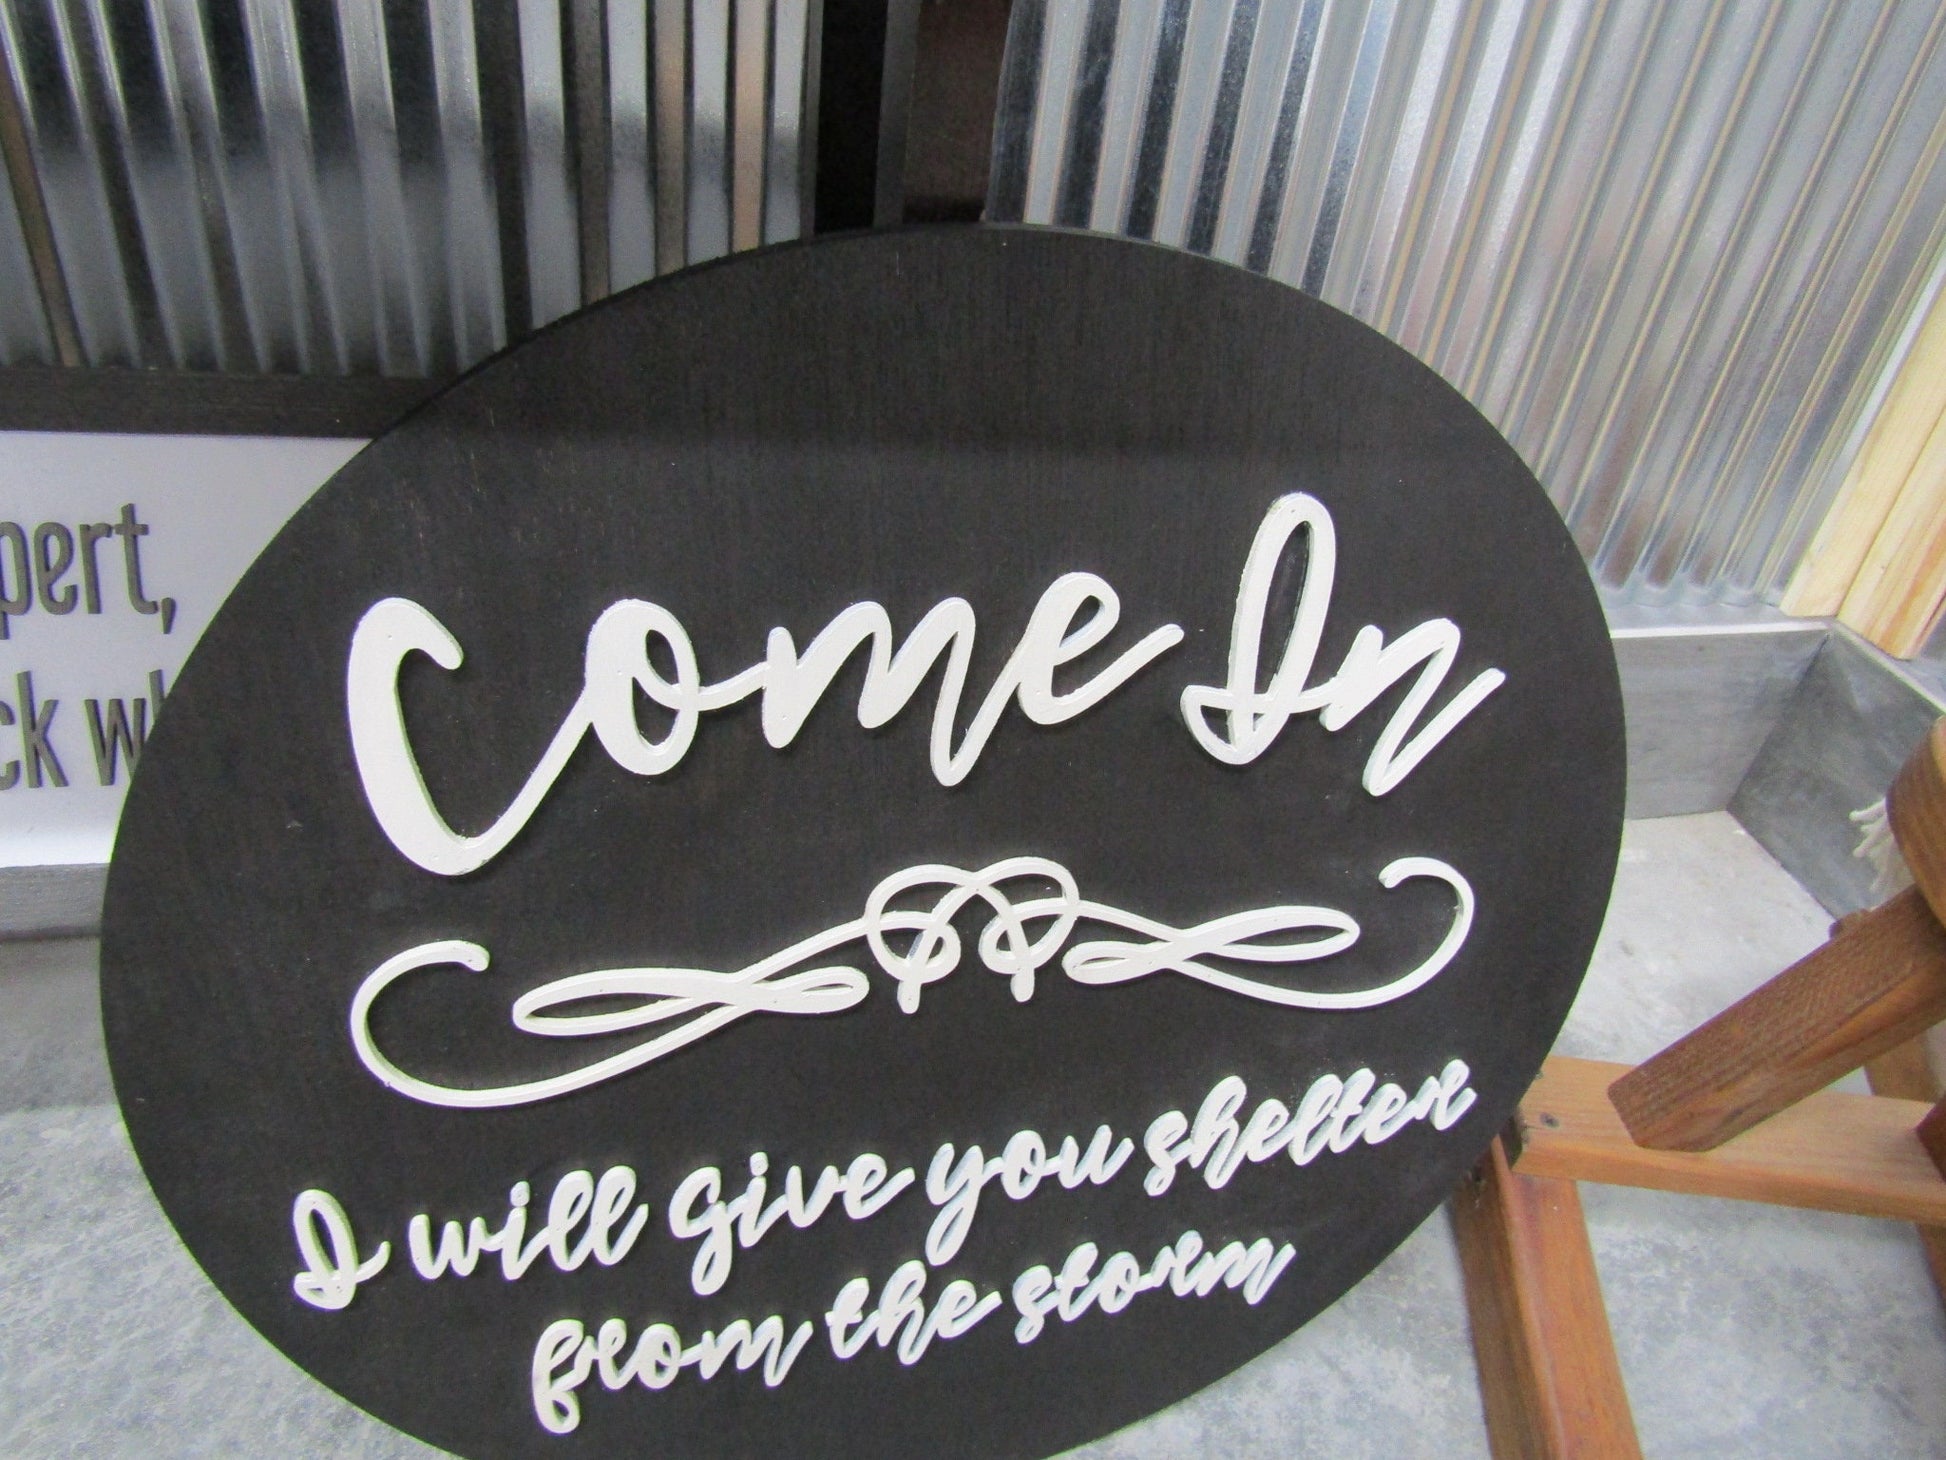 Come In Welcome Sign I Will Give You Shelter From The Storm Porch Sign Encouraging Quote Phrase Custom Personalized Wooden Handmade Decor